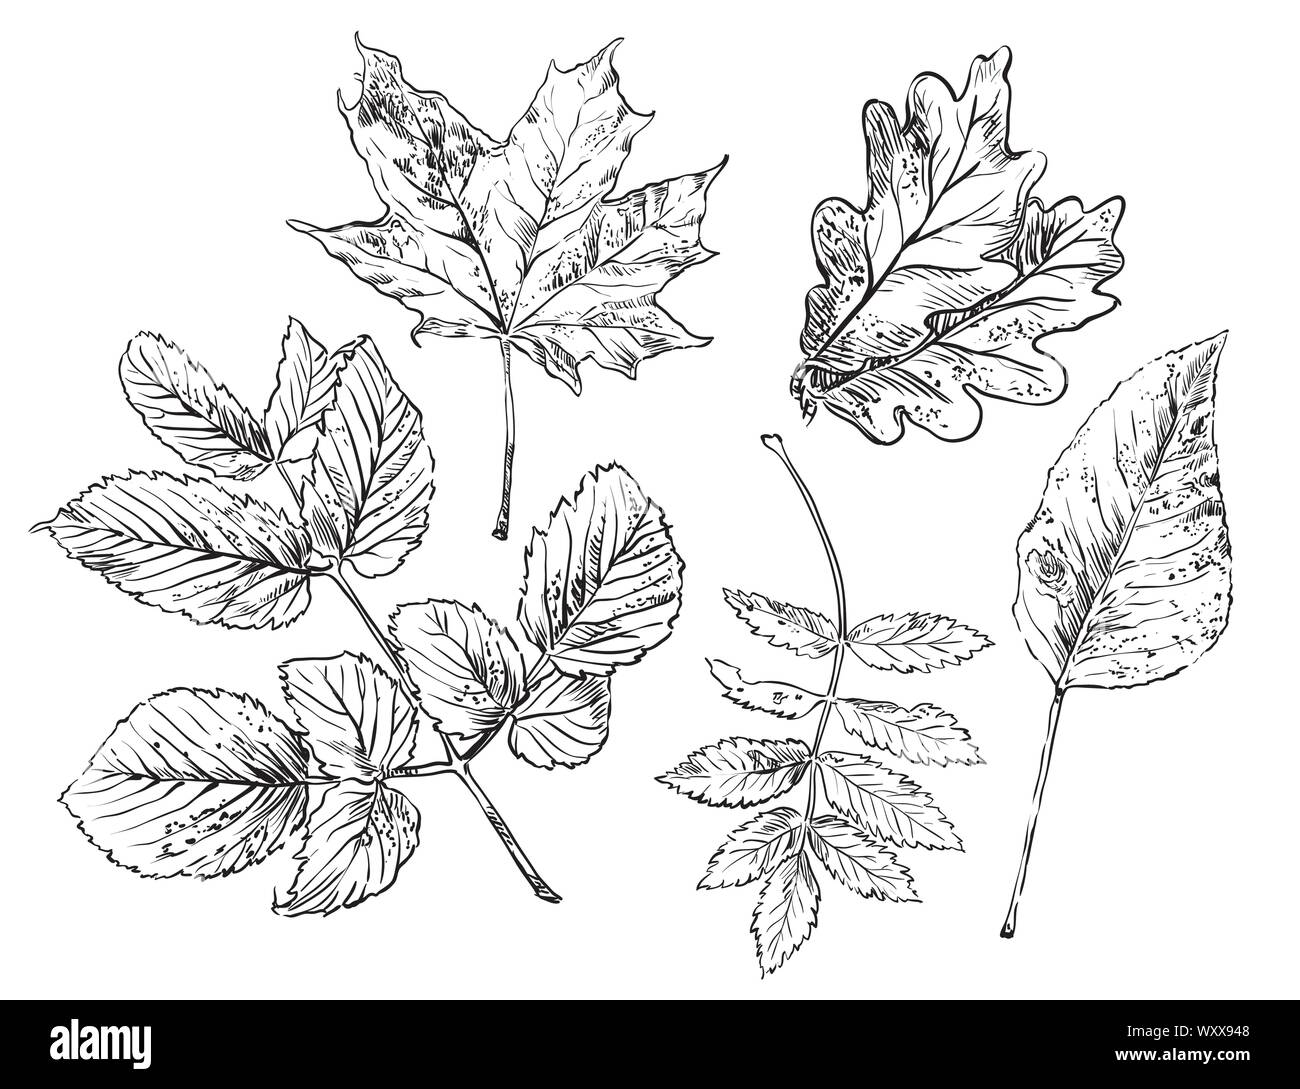 Vector autumn hand drawing maple, oak, rose hip, Rowan, leaves outline on the white background. Fall line art of foliage. stock illustration Stock Vector